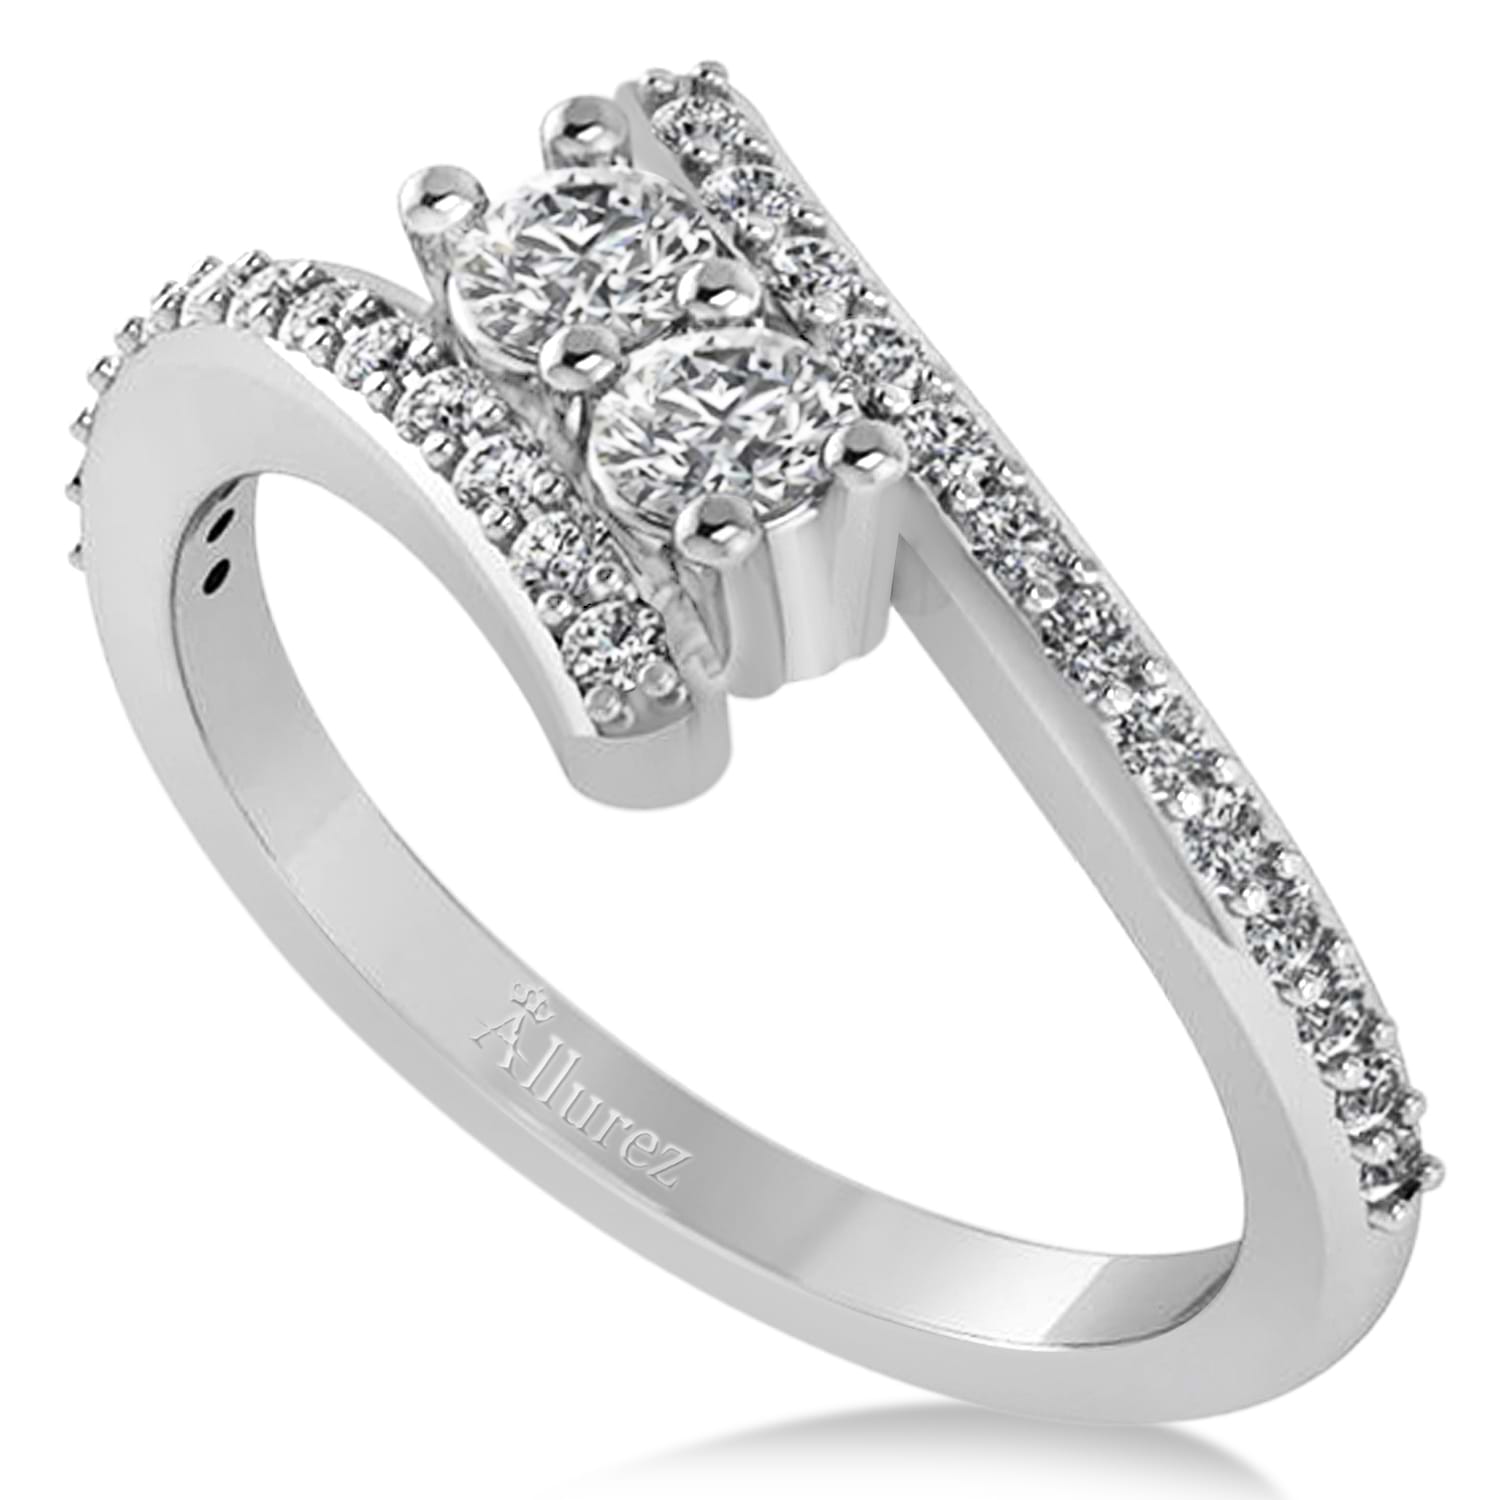 Diamond Two Stone Bypass Ring 14k White Gold (0.50ct)